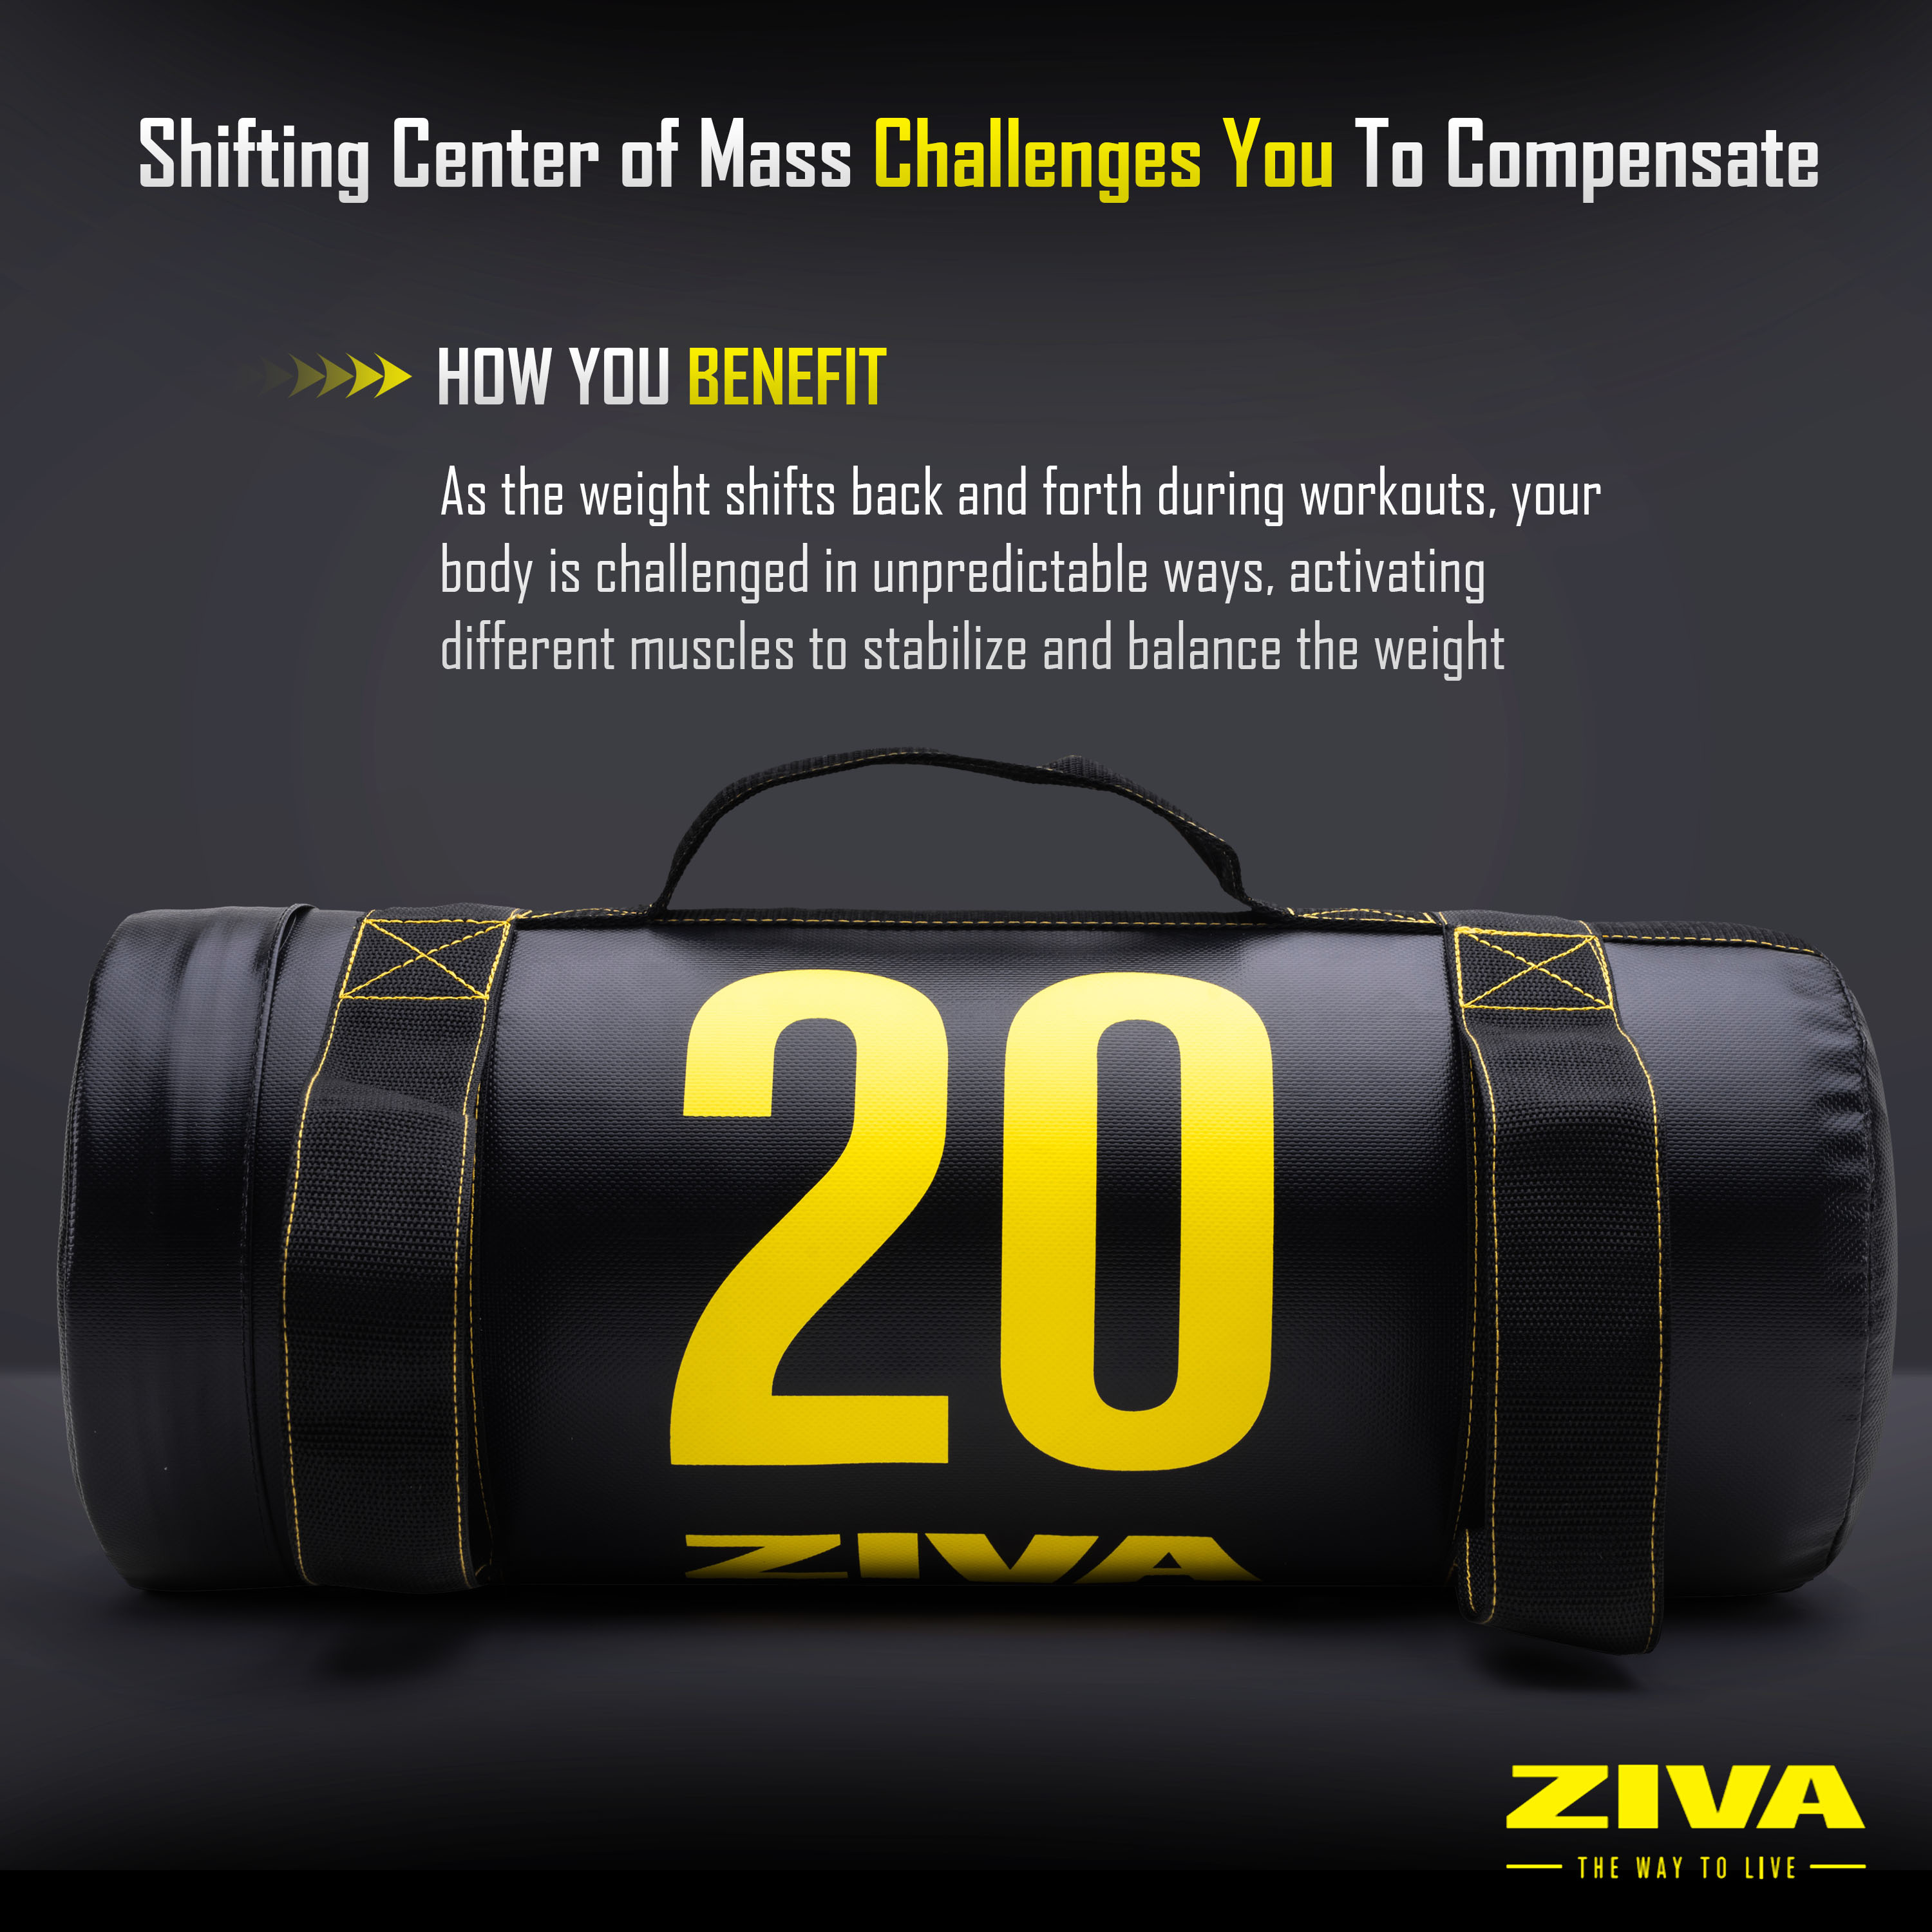 Shifting center of mass challenges you to compensate. How you benefit: As the weight shifts back and forth during workouts, your body is challenged in unpredictable ways, activating different muscles to stabilize and balance the weight.